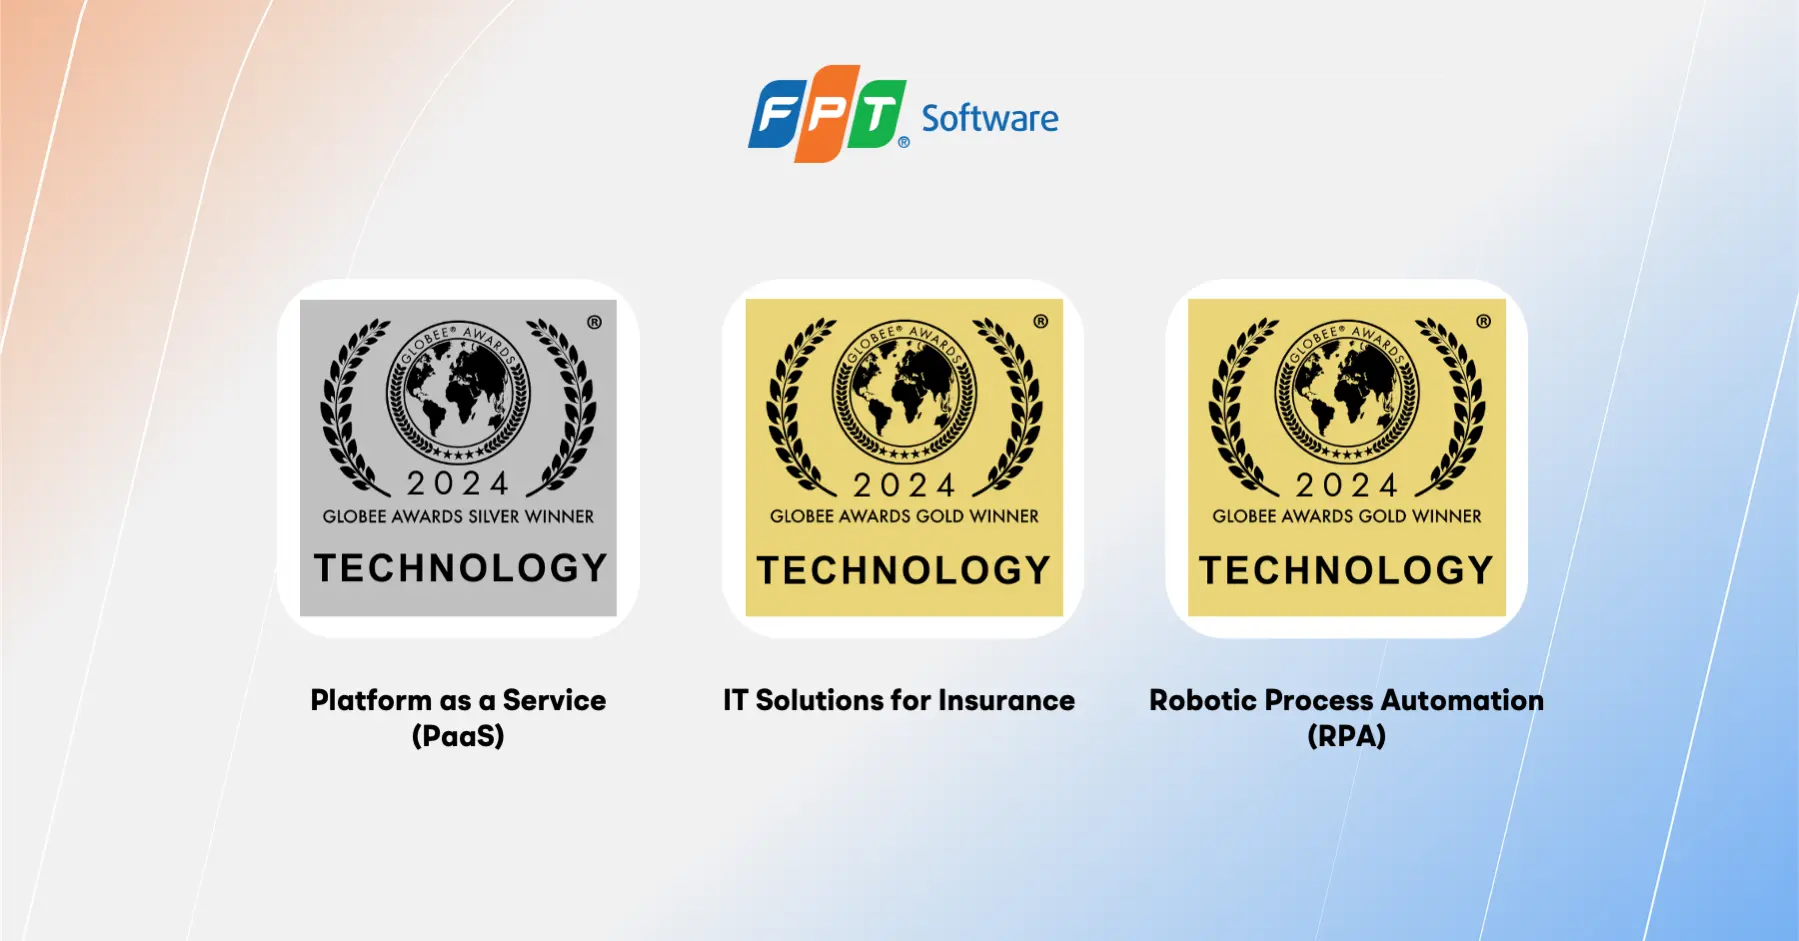  FPT Software Earns Triple Wins at 2024 Globee Awards for Technology